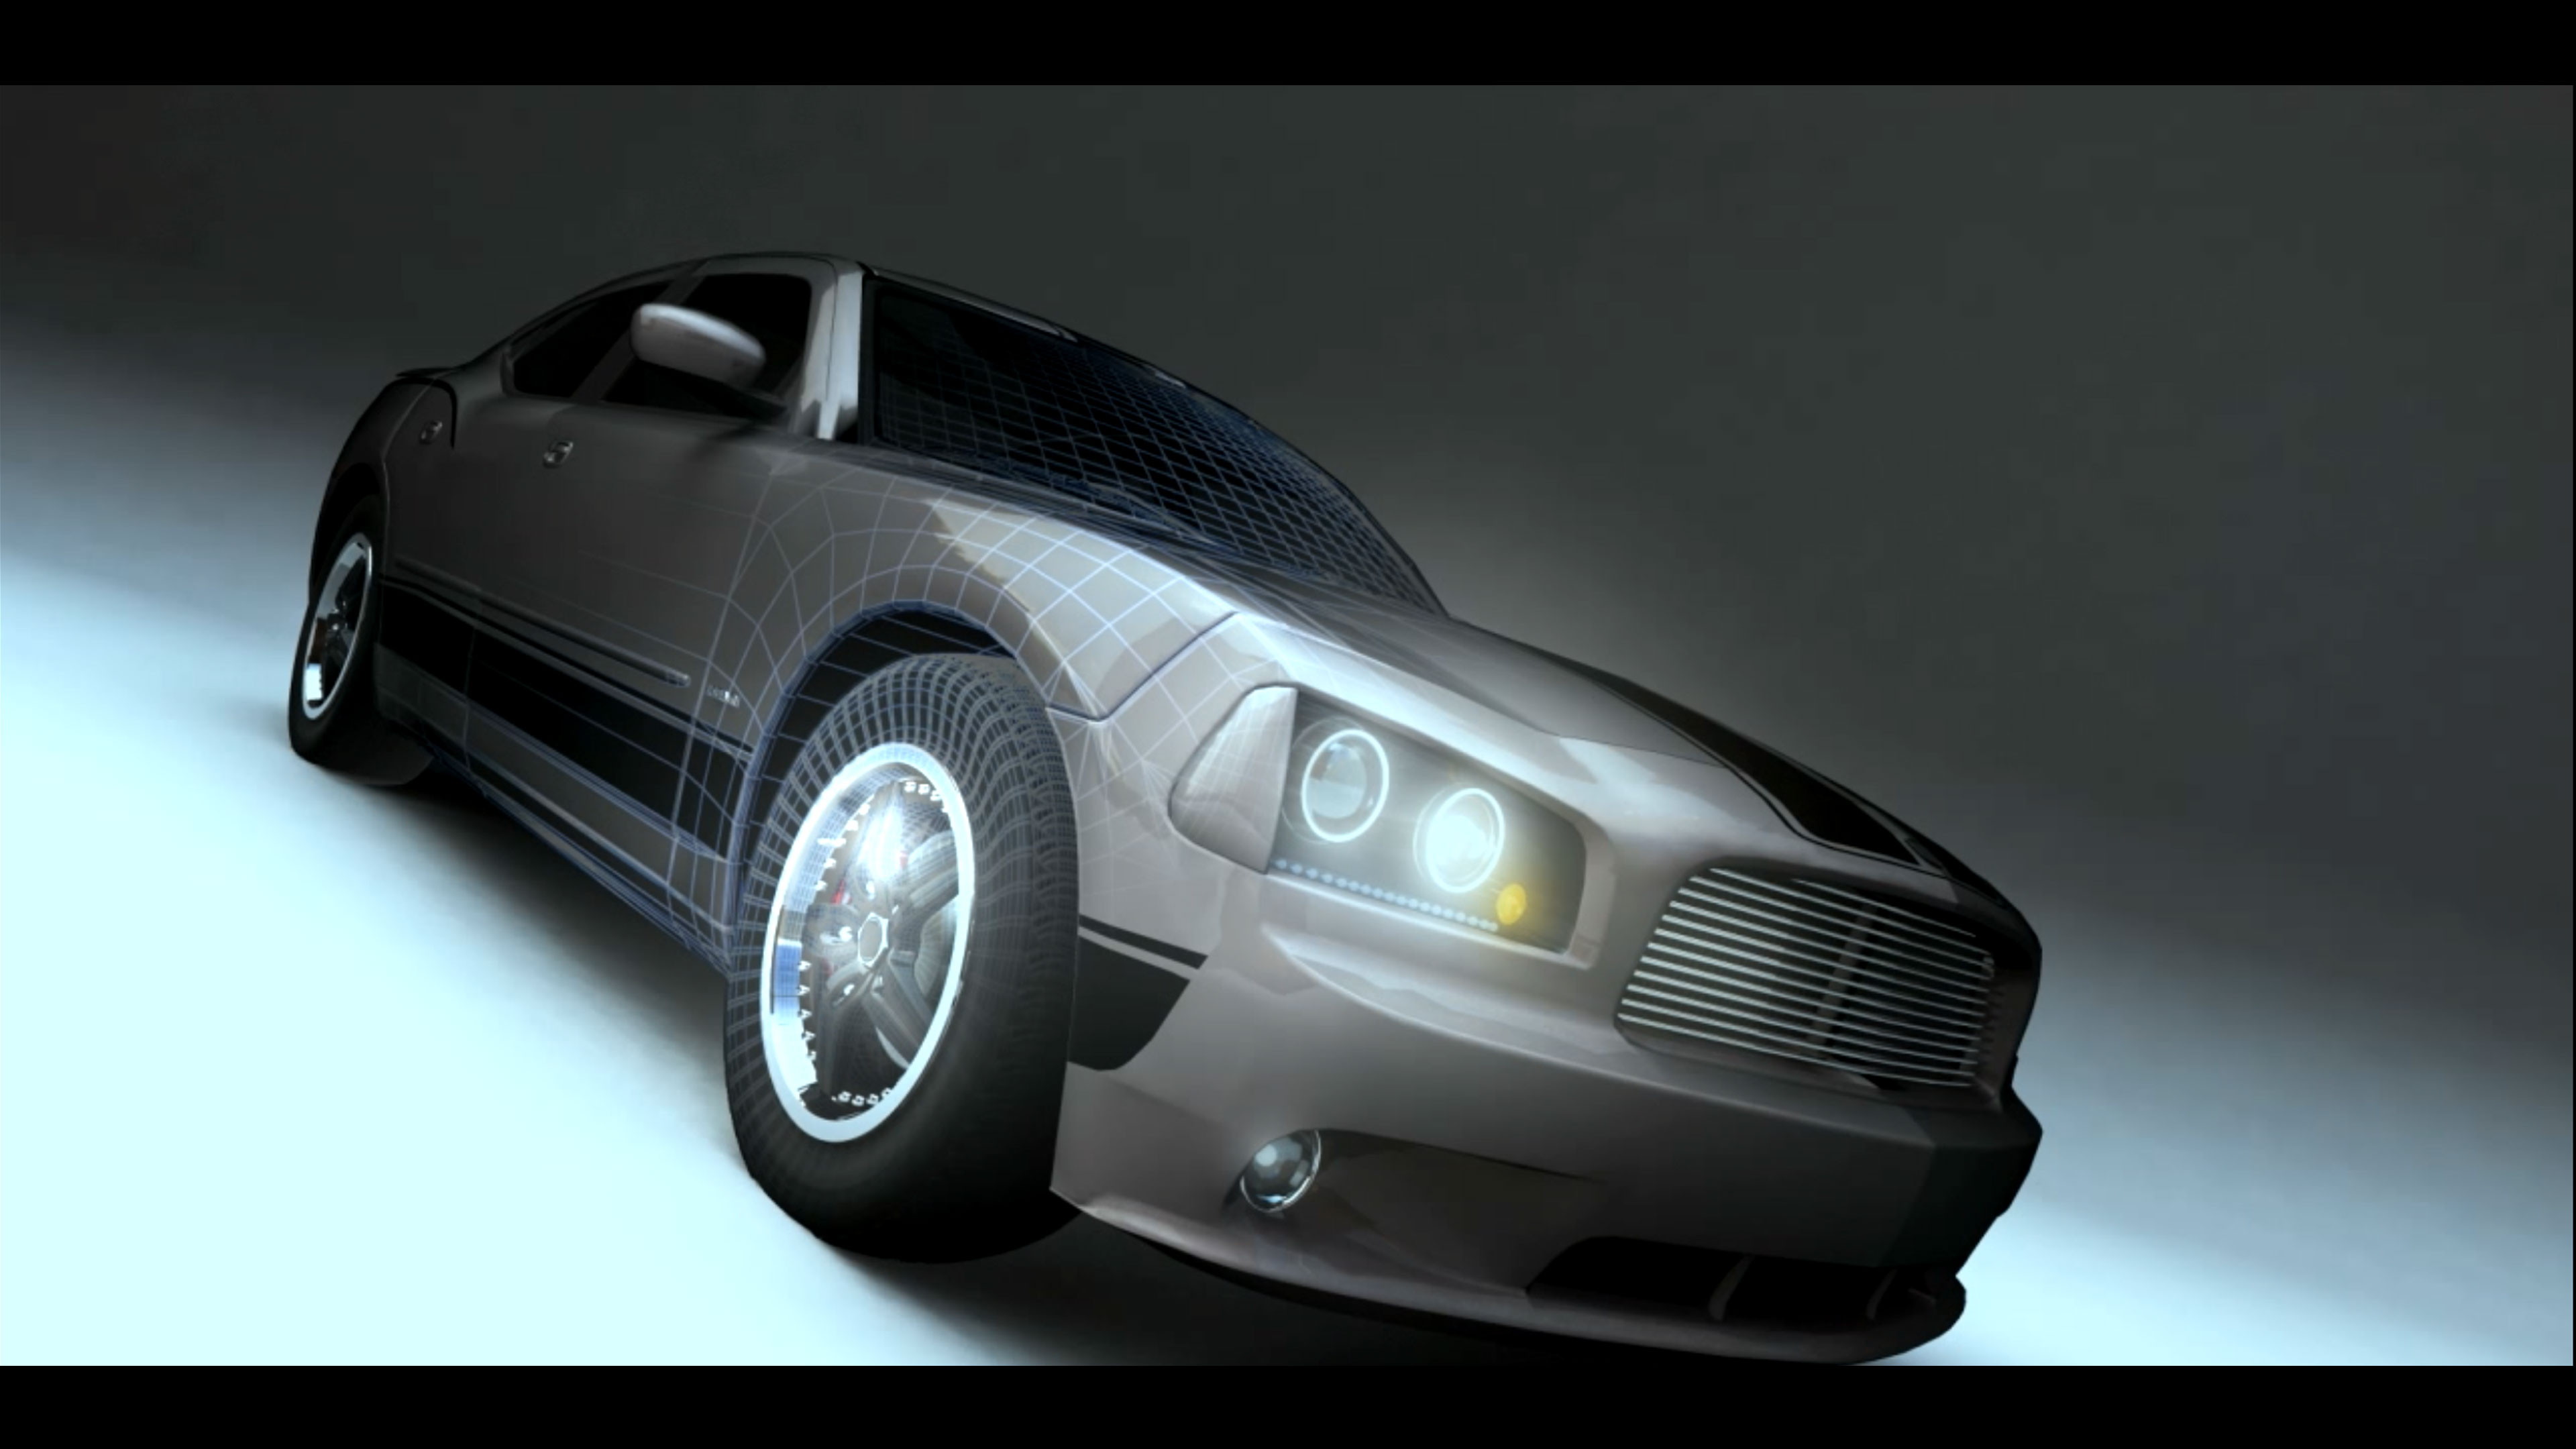 Modeled my car as it was in 2011